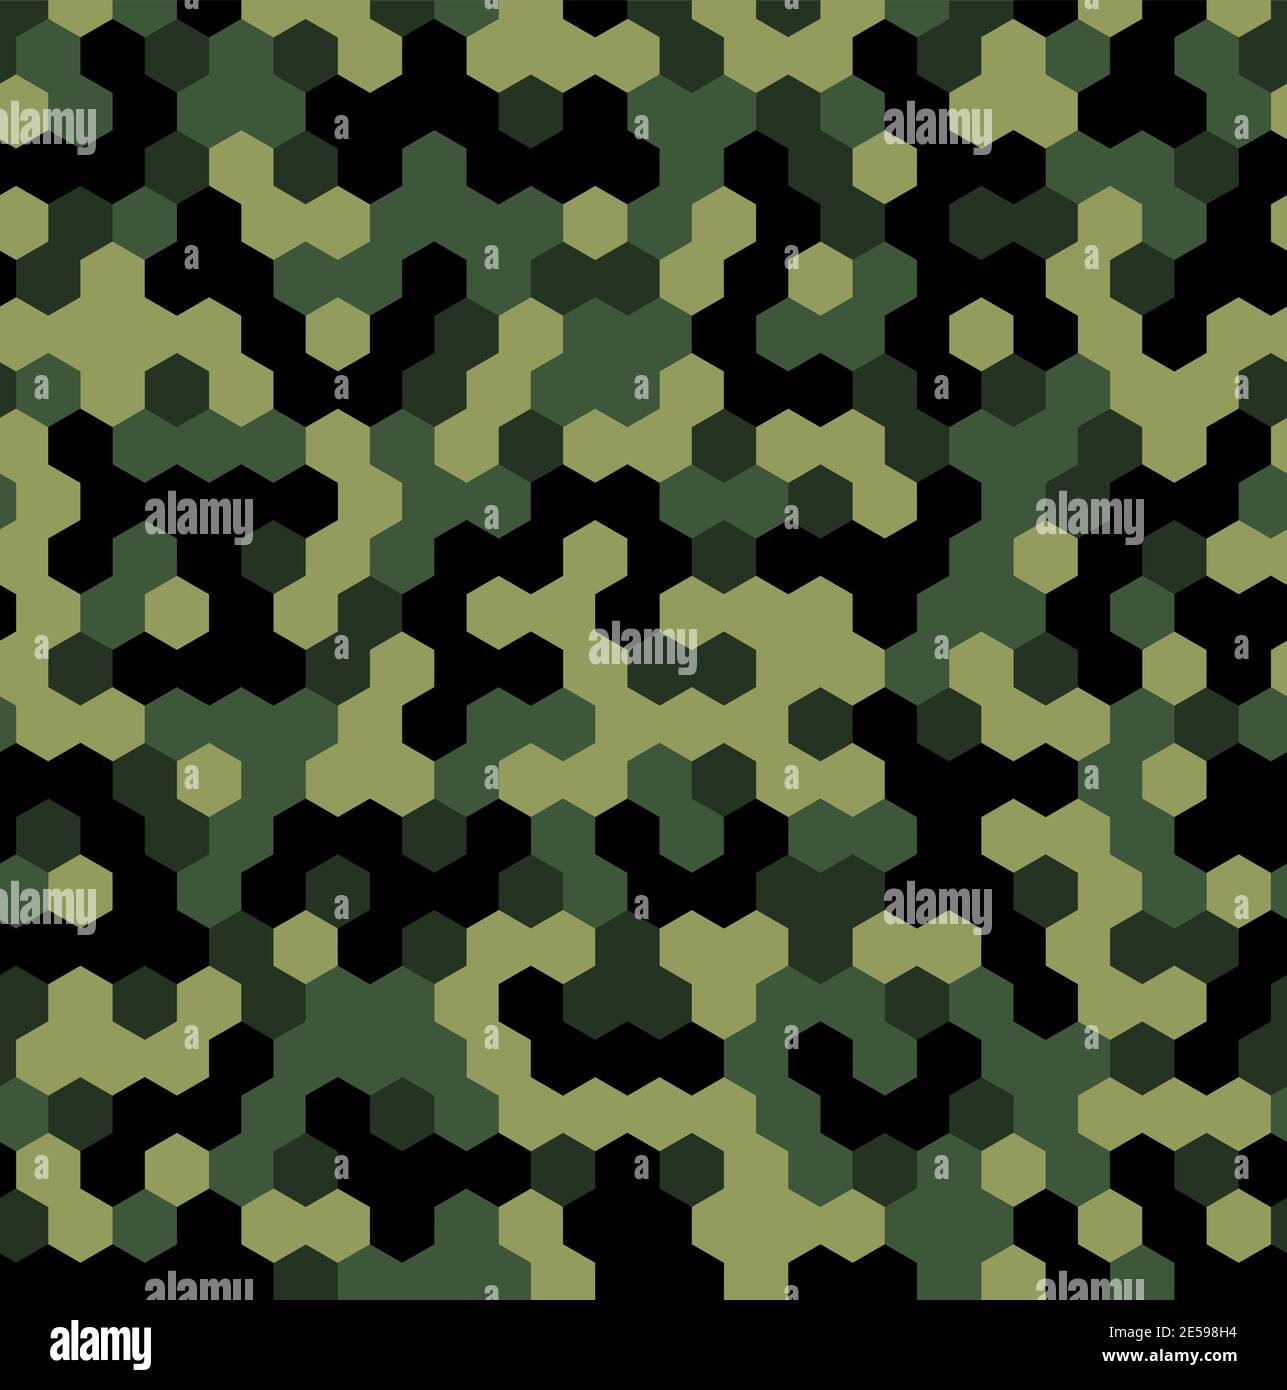 Hexagon Forest Camouflage nahtlose Muster Stock Vektor